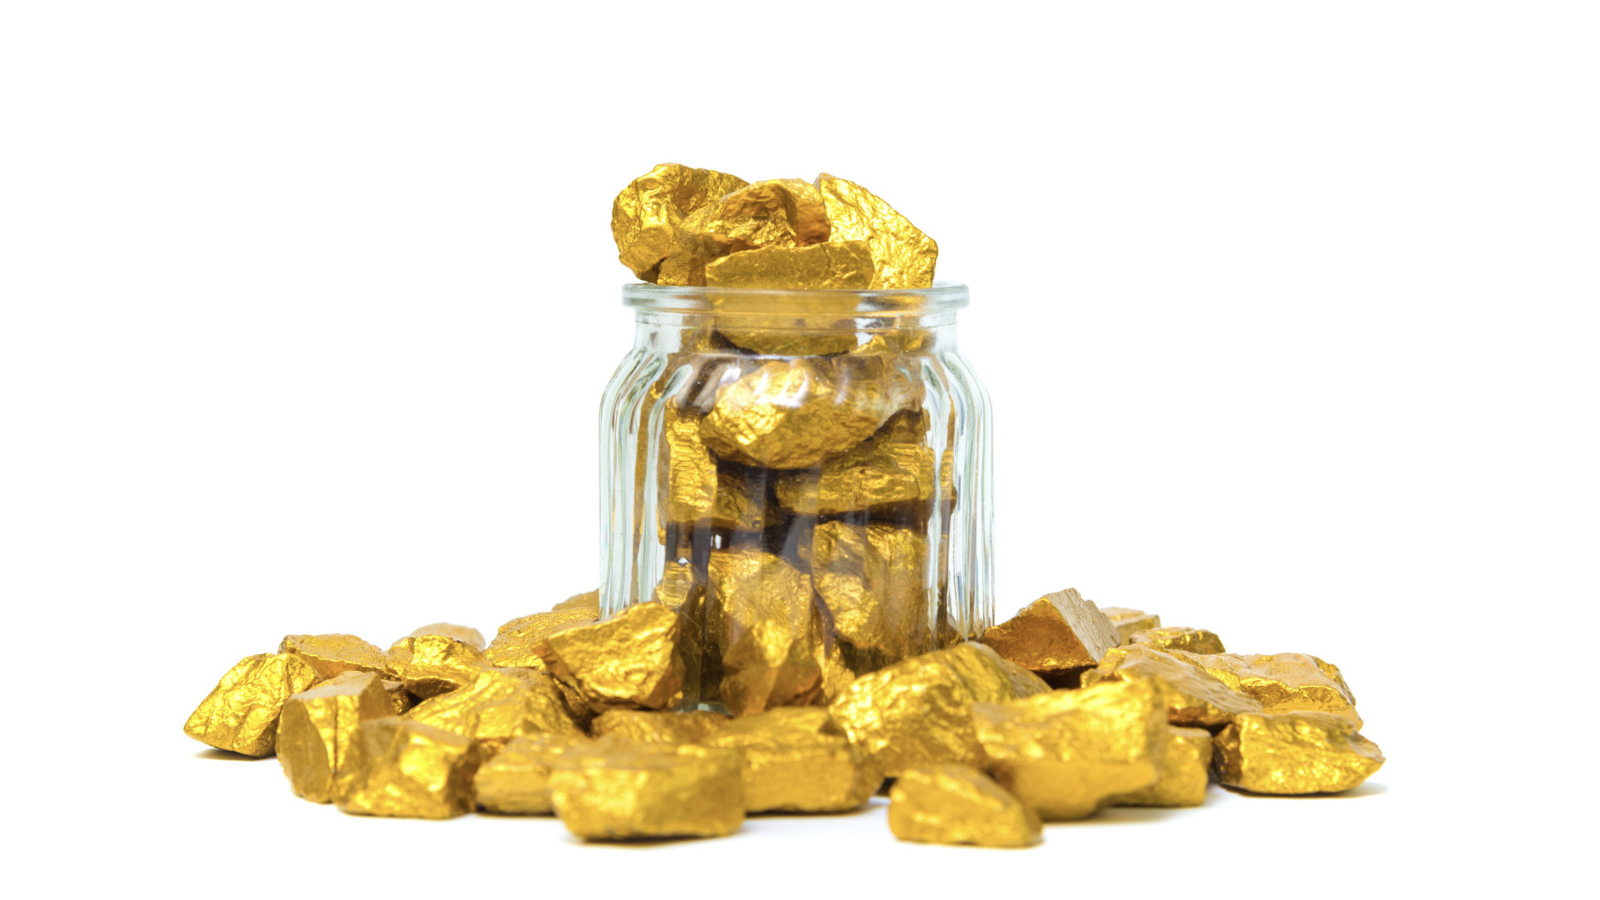 Gold nuggets for your reading